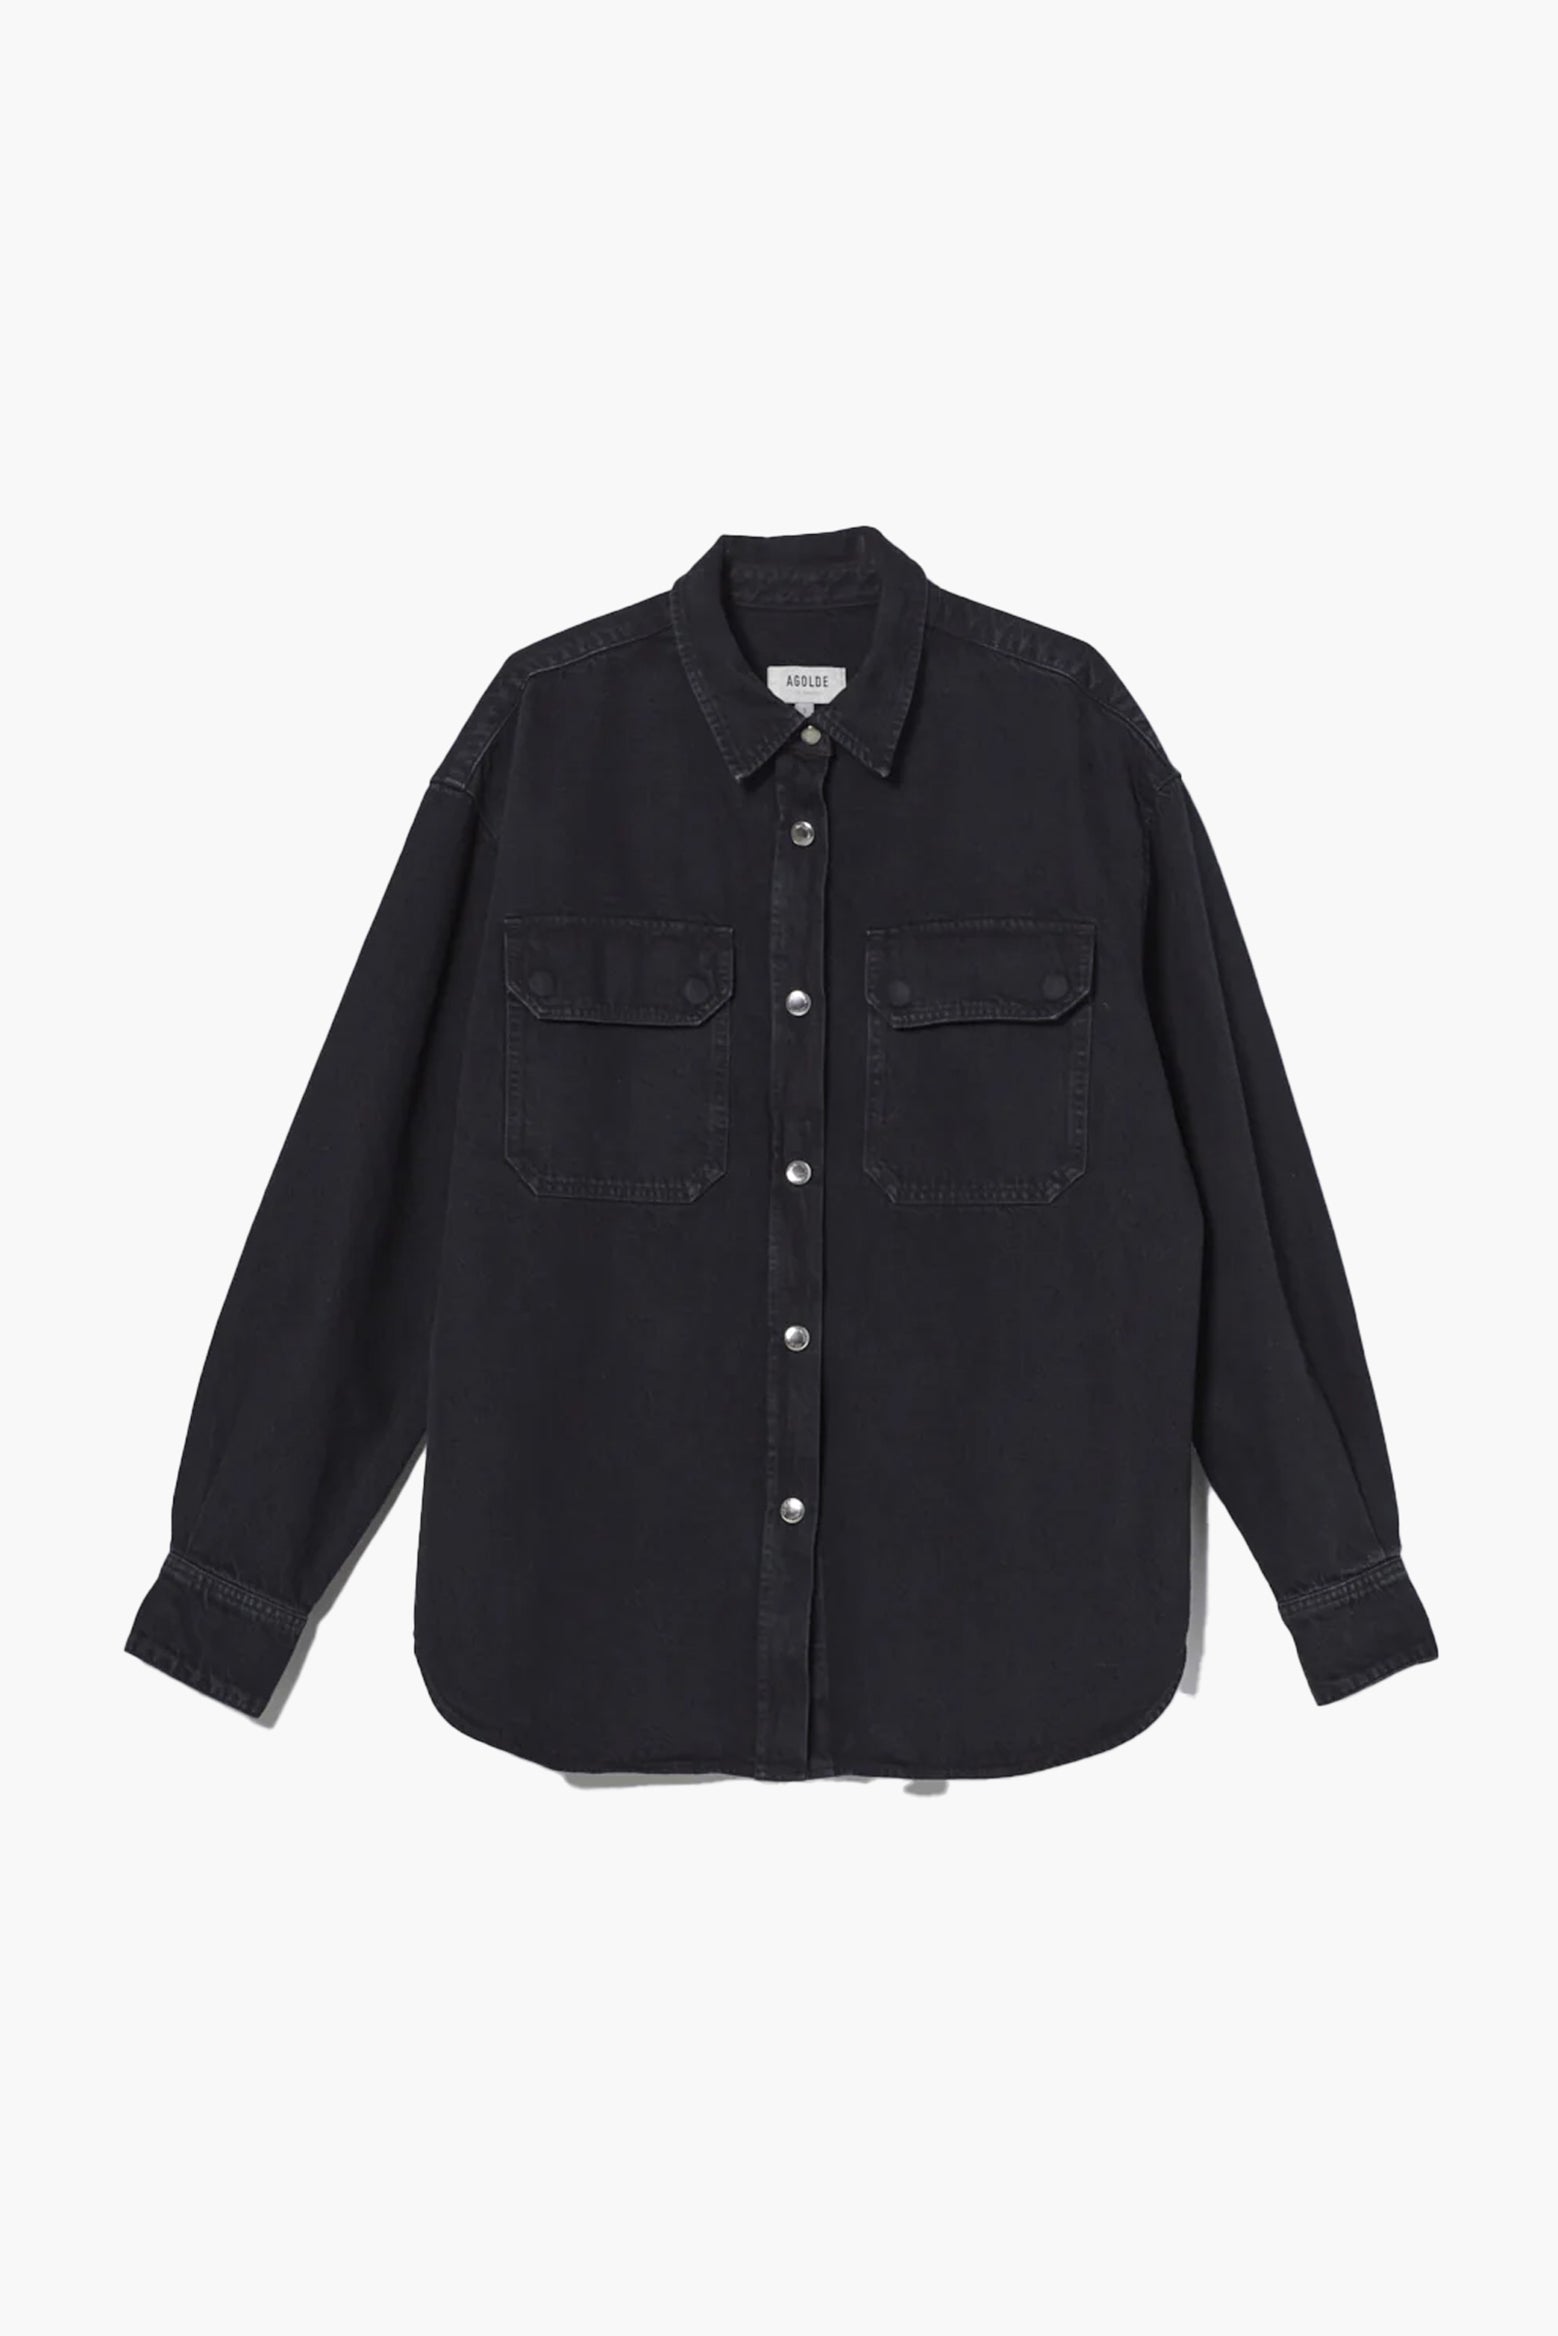 AGOLDE Camryn Shirt in Crushed | The New Trend Australia